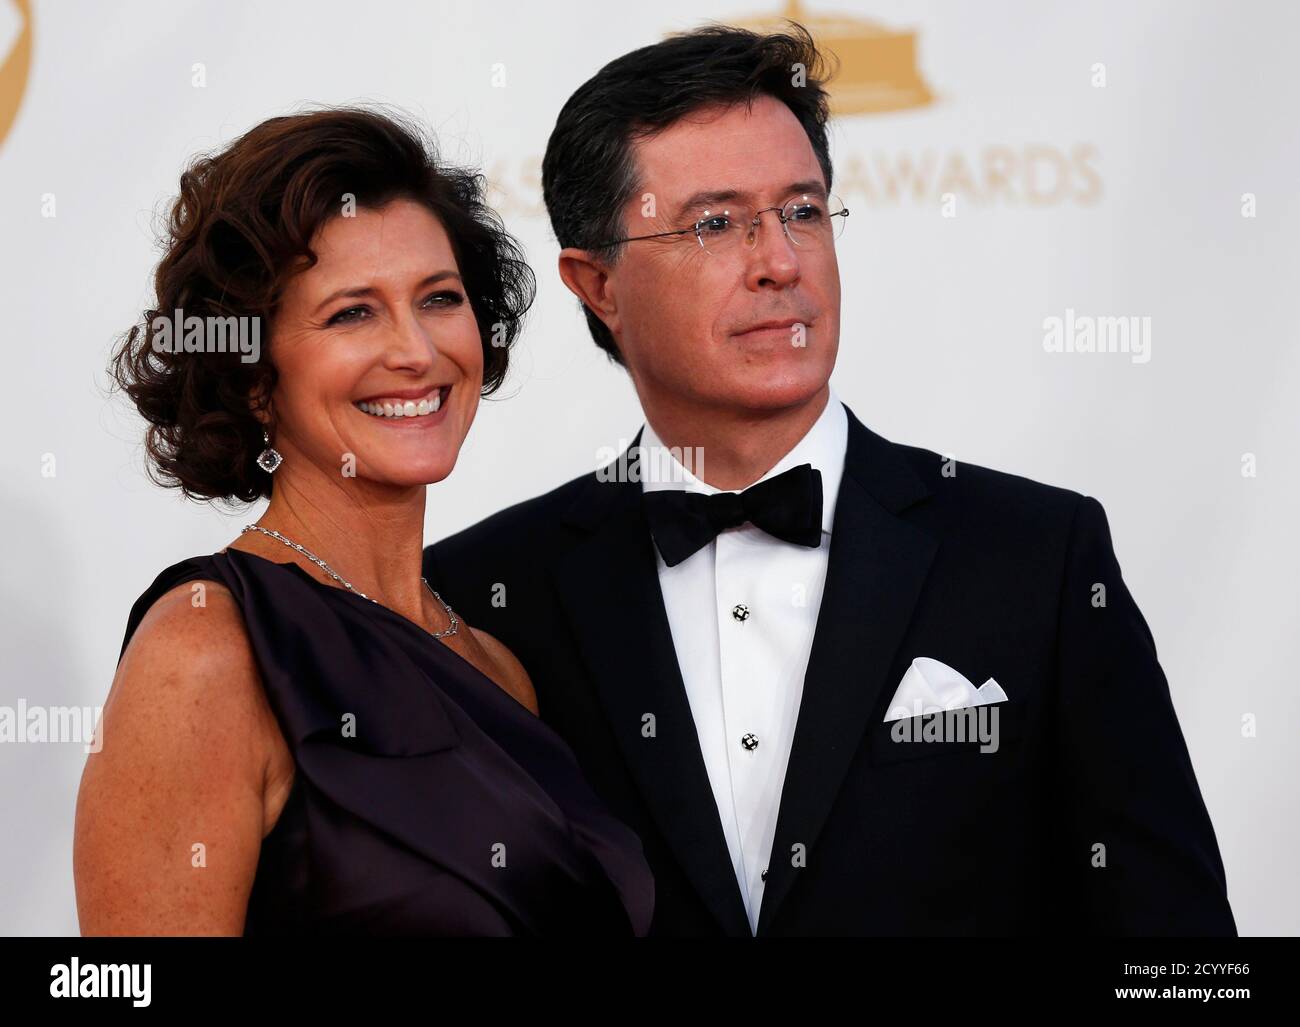 Colbert Report host Stephen Colbert and wife, Evelyn McGee, arrive at the 65th Primetime Emmy Awards in Los Angeles September 22, 2013. REUTERS/Mario Anzuoni (UNITED STATES Tags: ENTERTAINMENT) (EMMYS-ARRIVALS) Stock Photo